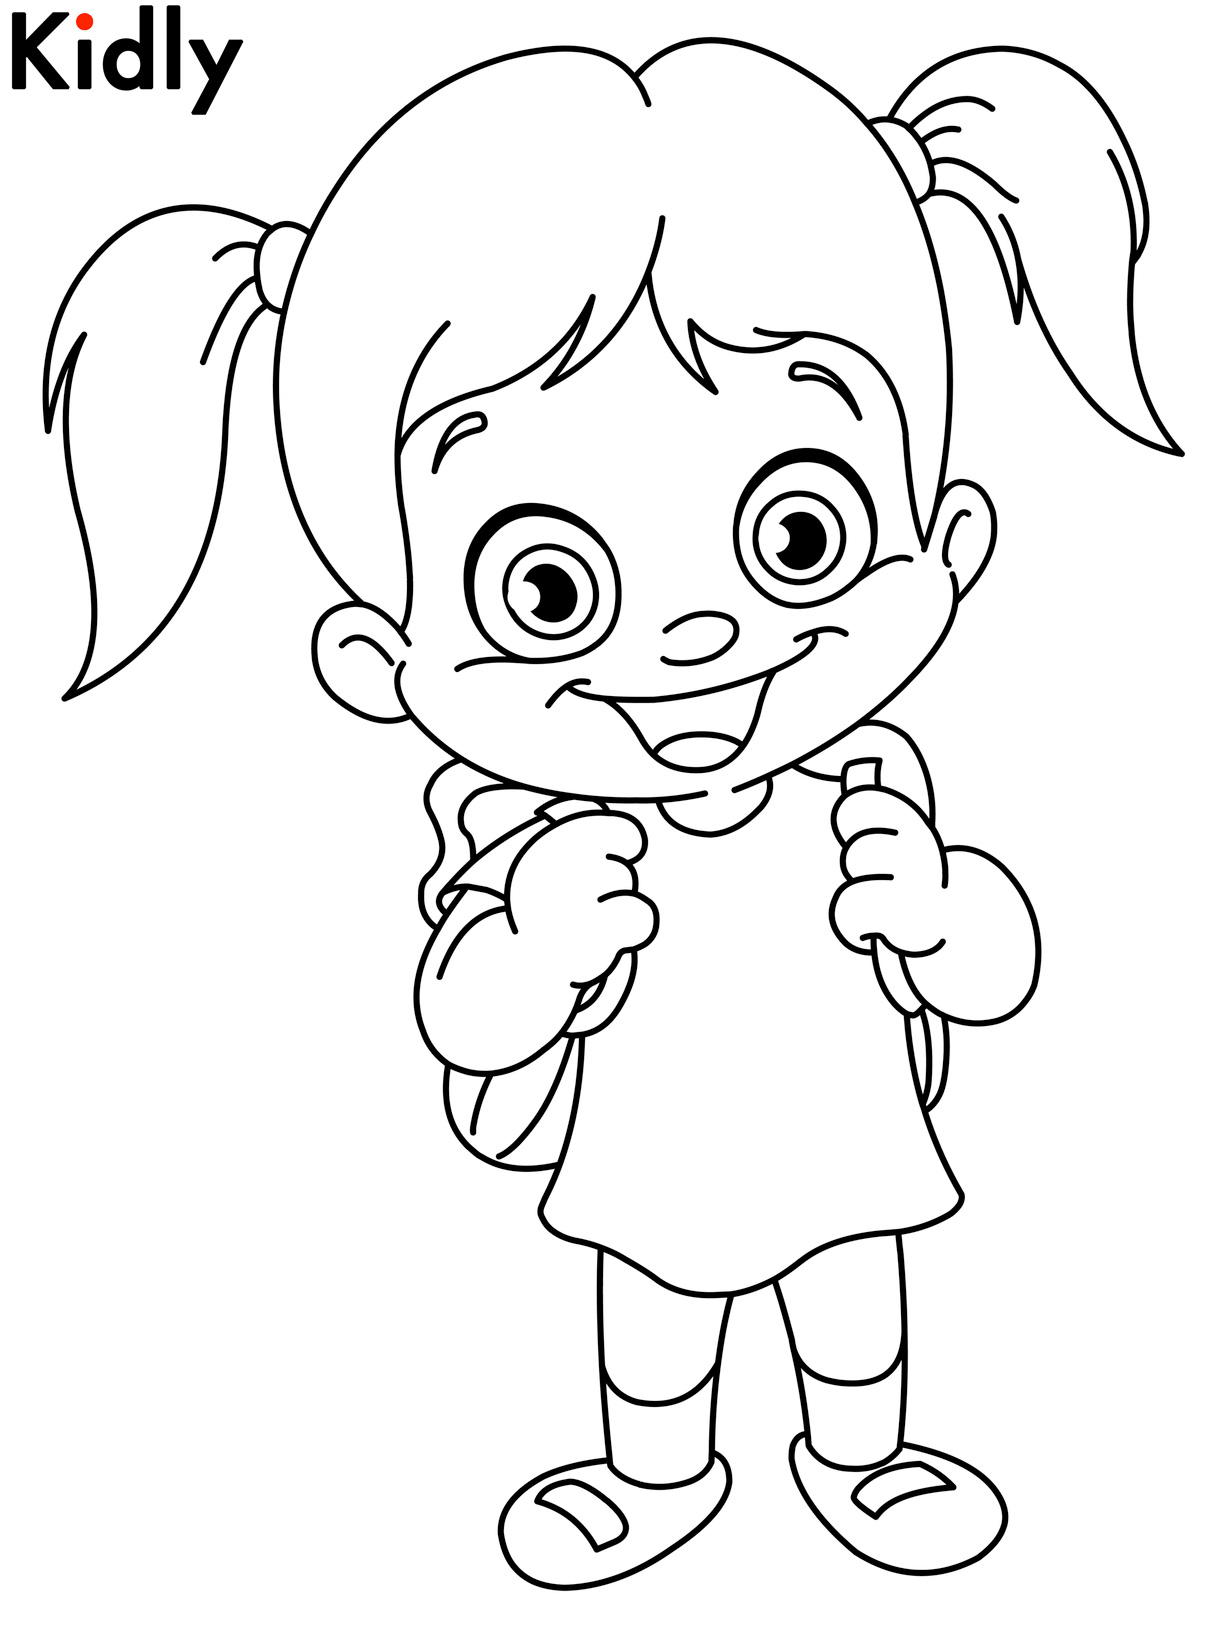 Childrens Day Coloring Pages Coloring Kids - Coloring Kids